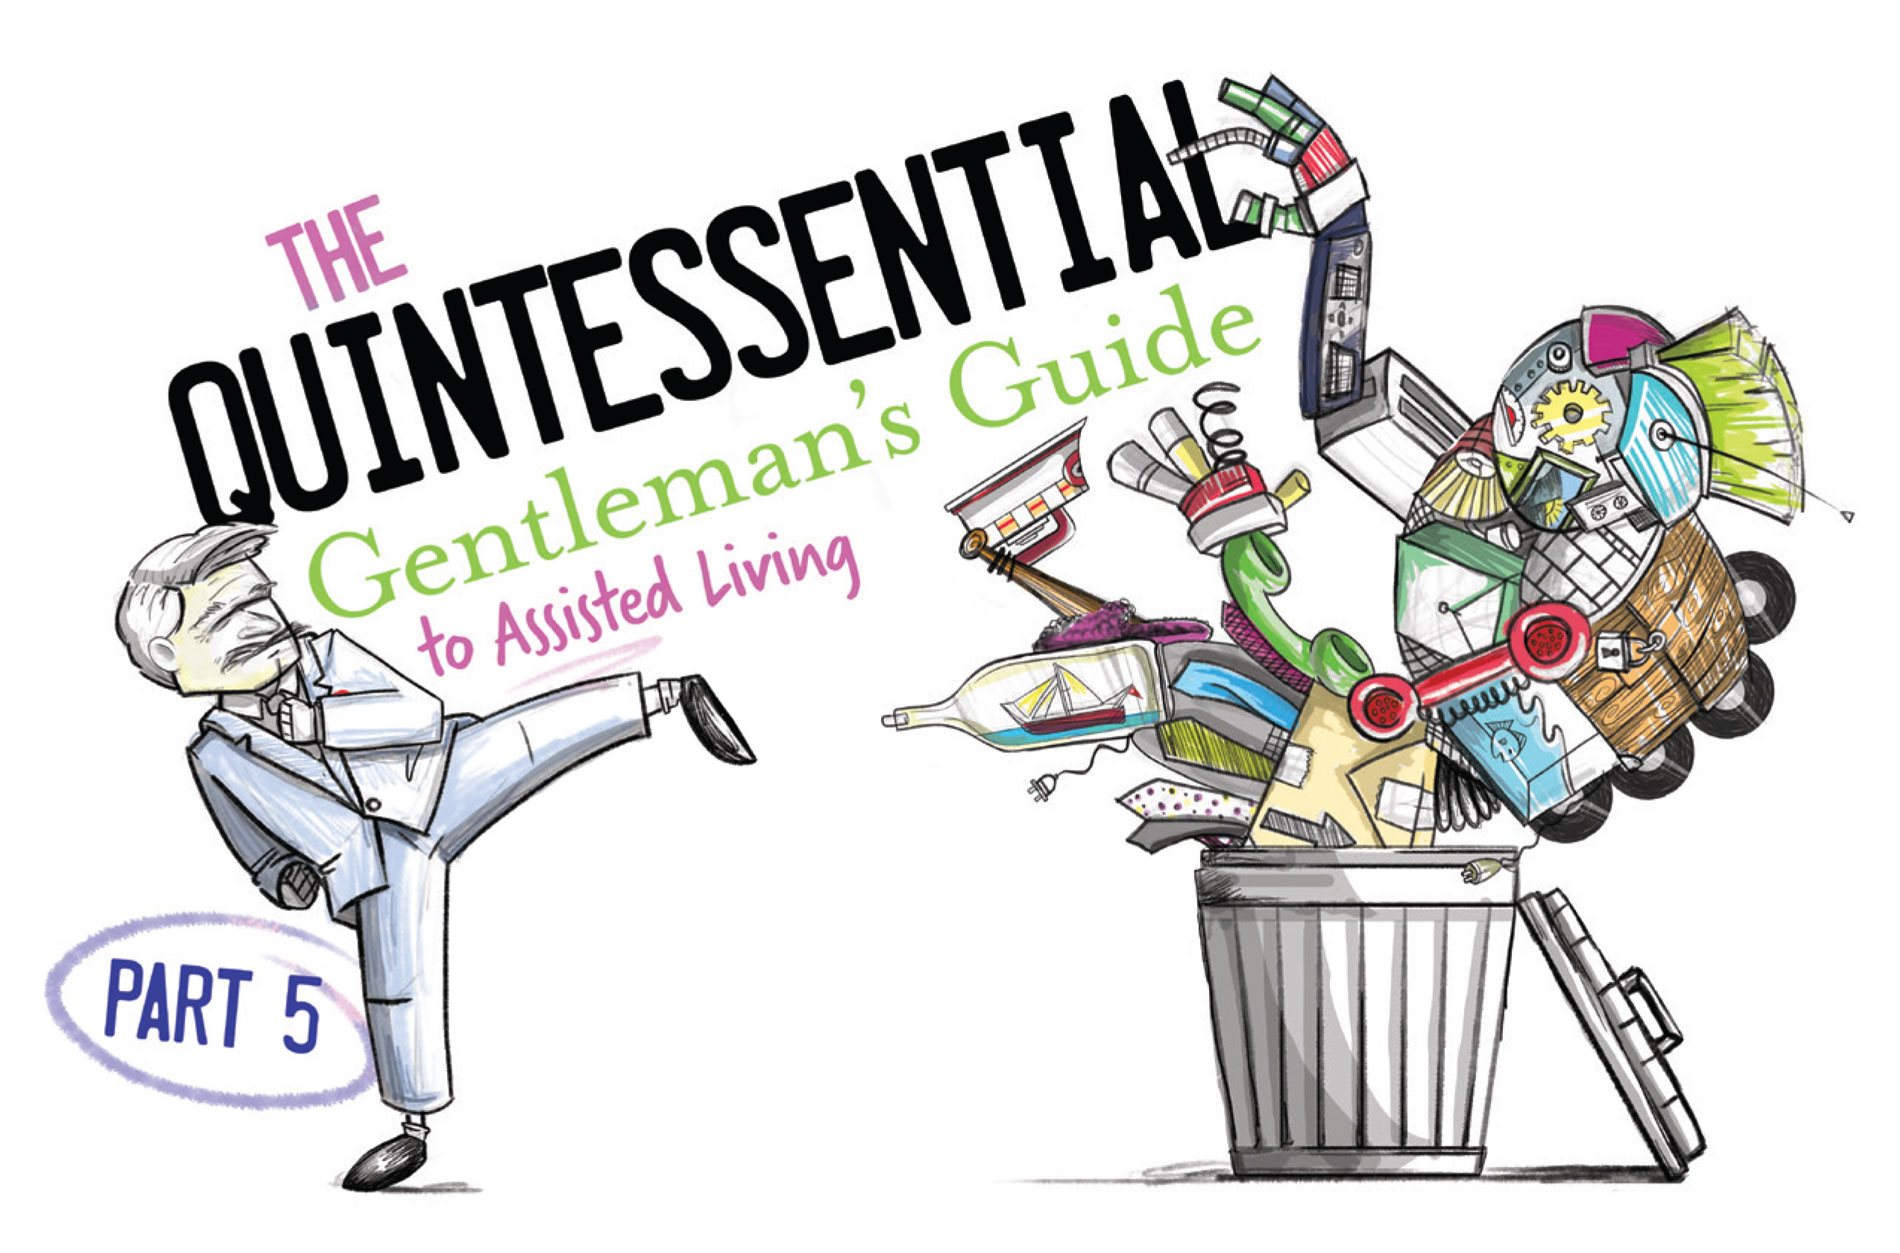 The Quintessential Gentleman's Guide to Assisted Living: Part 5